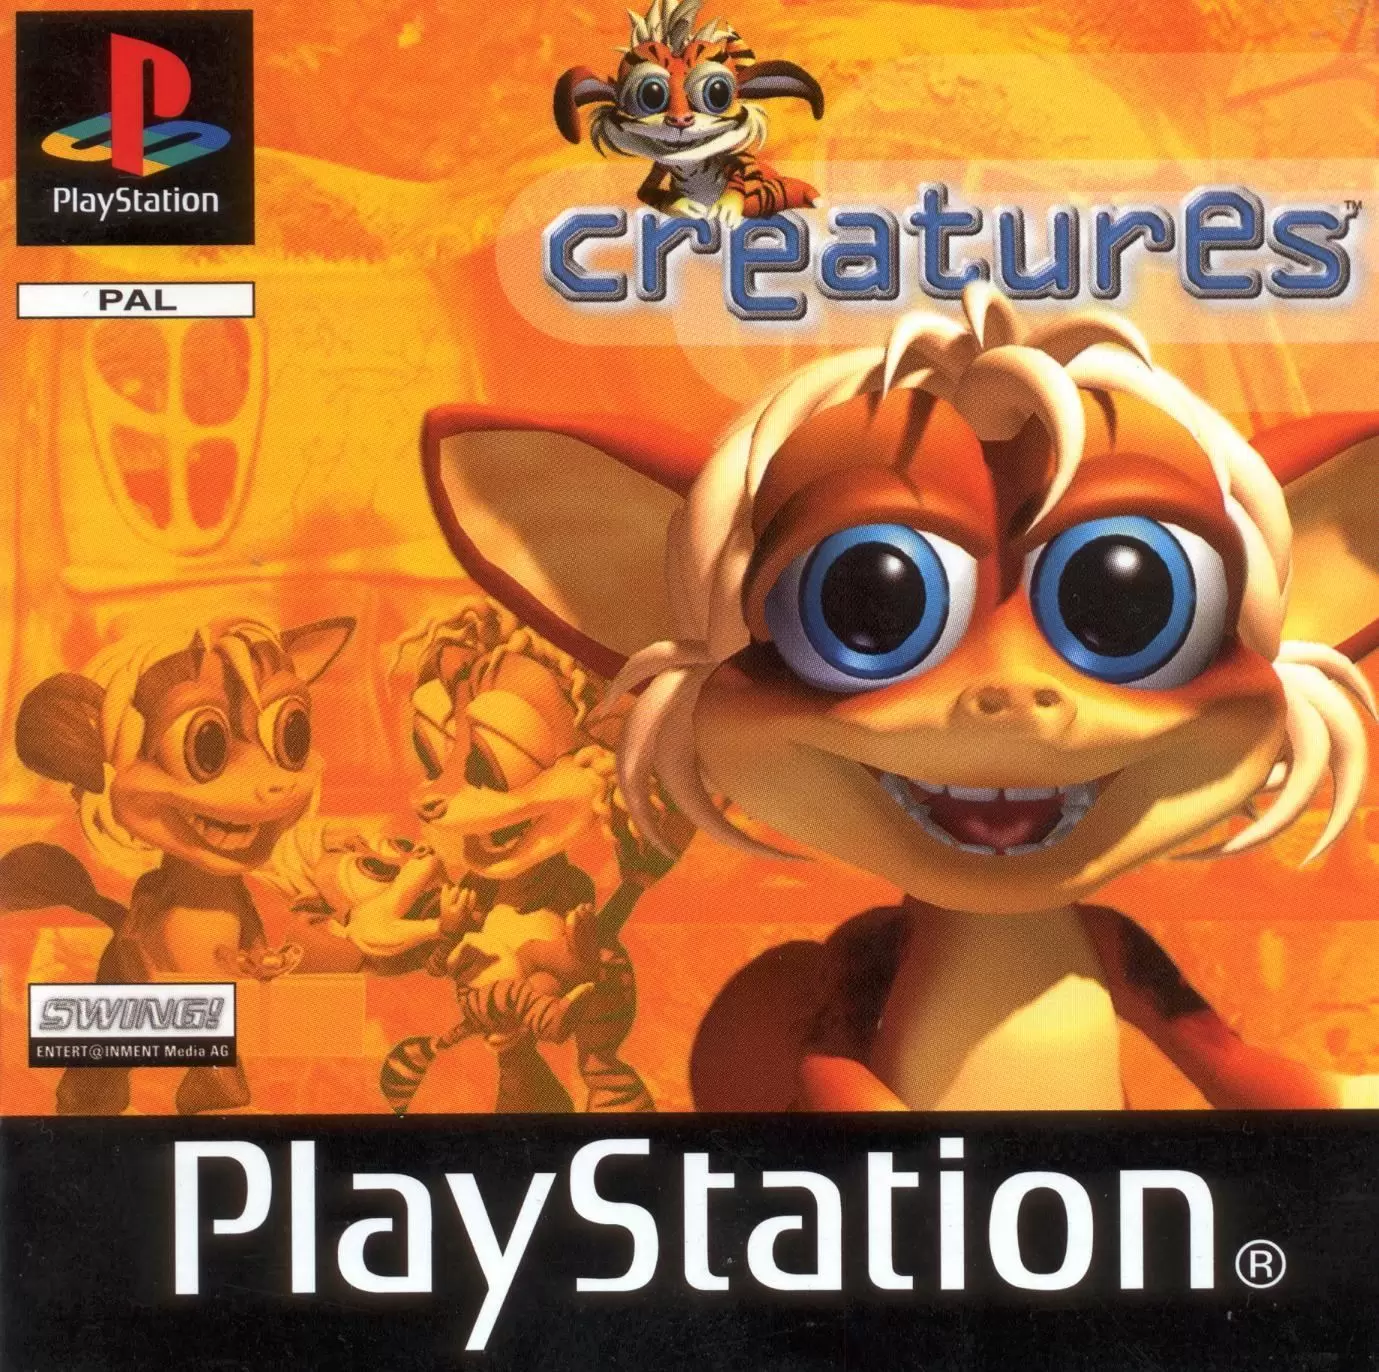 Playstation games - Creatures